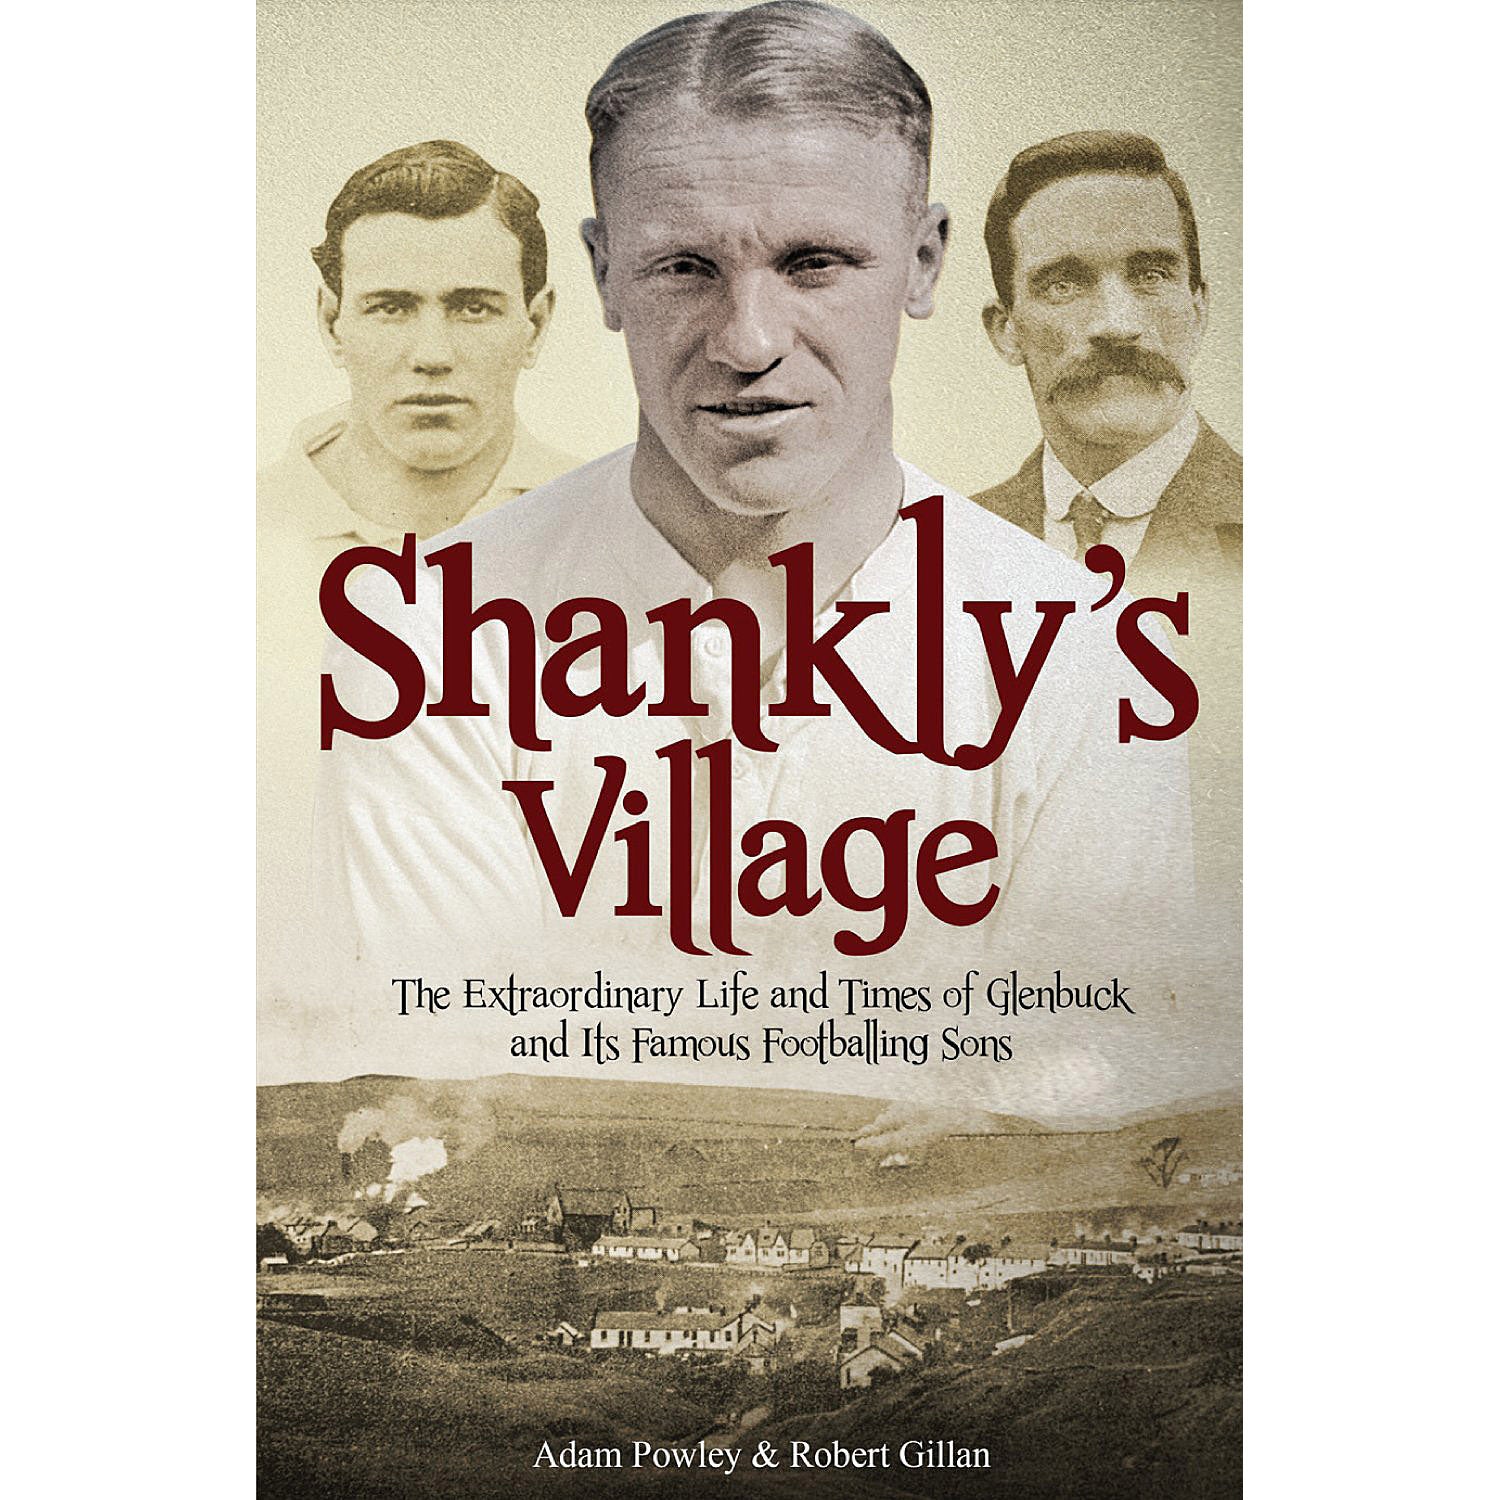 Shankly's Village – The Extraordinary Life and Times of Glenbuck and Its Famous Footballing Sons